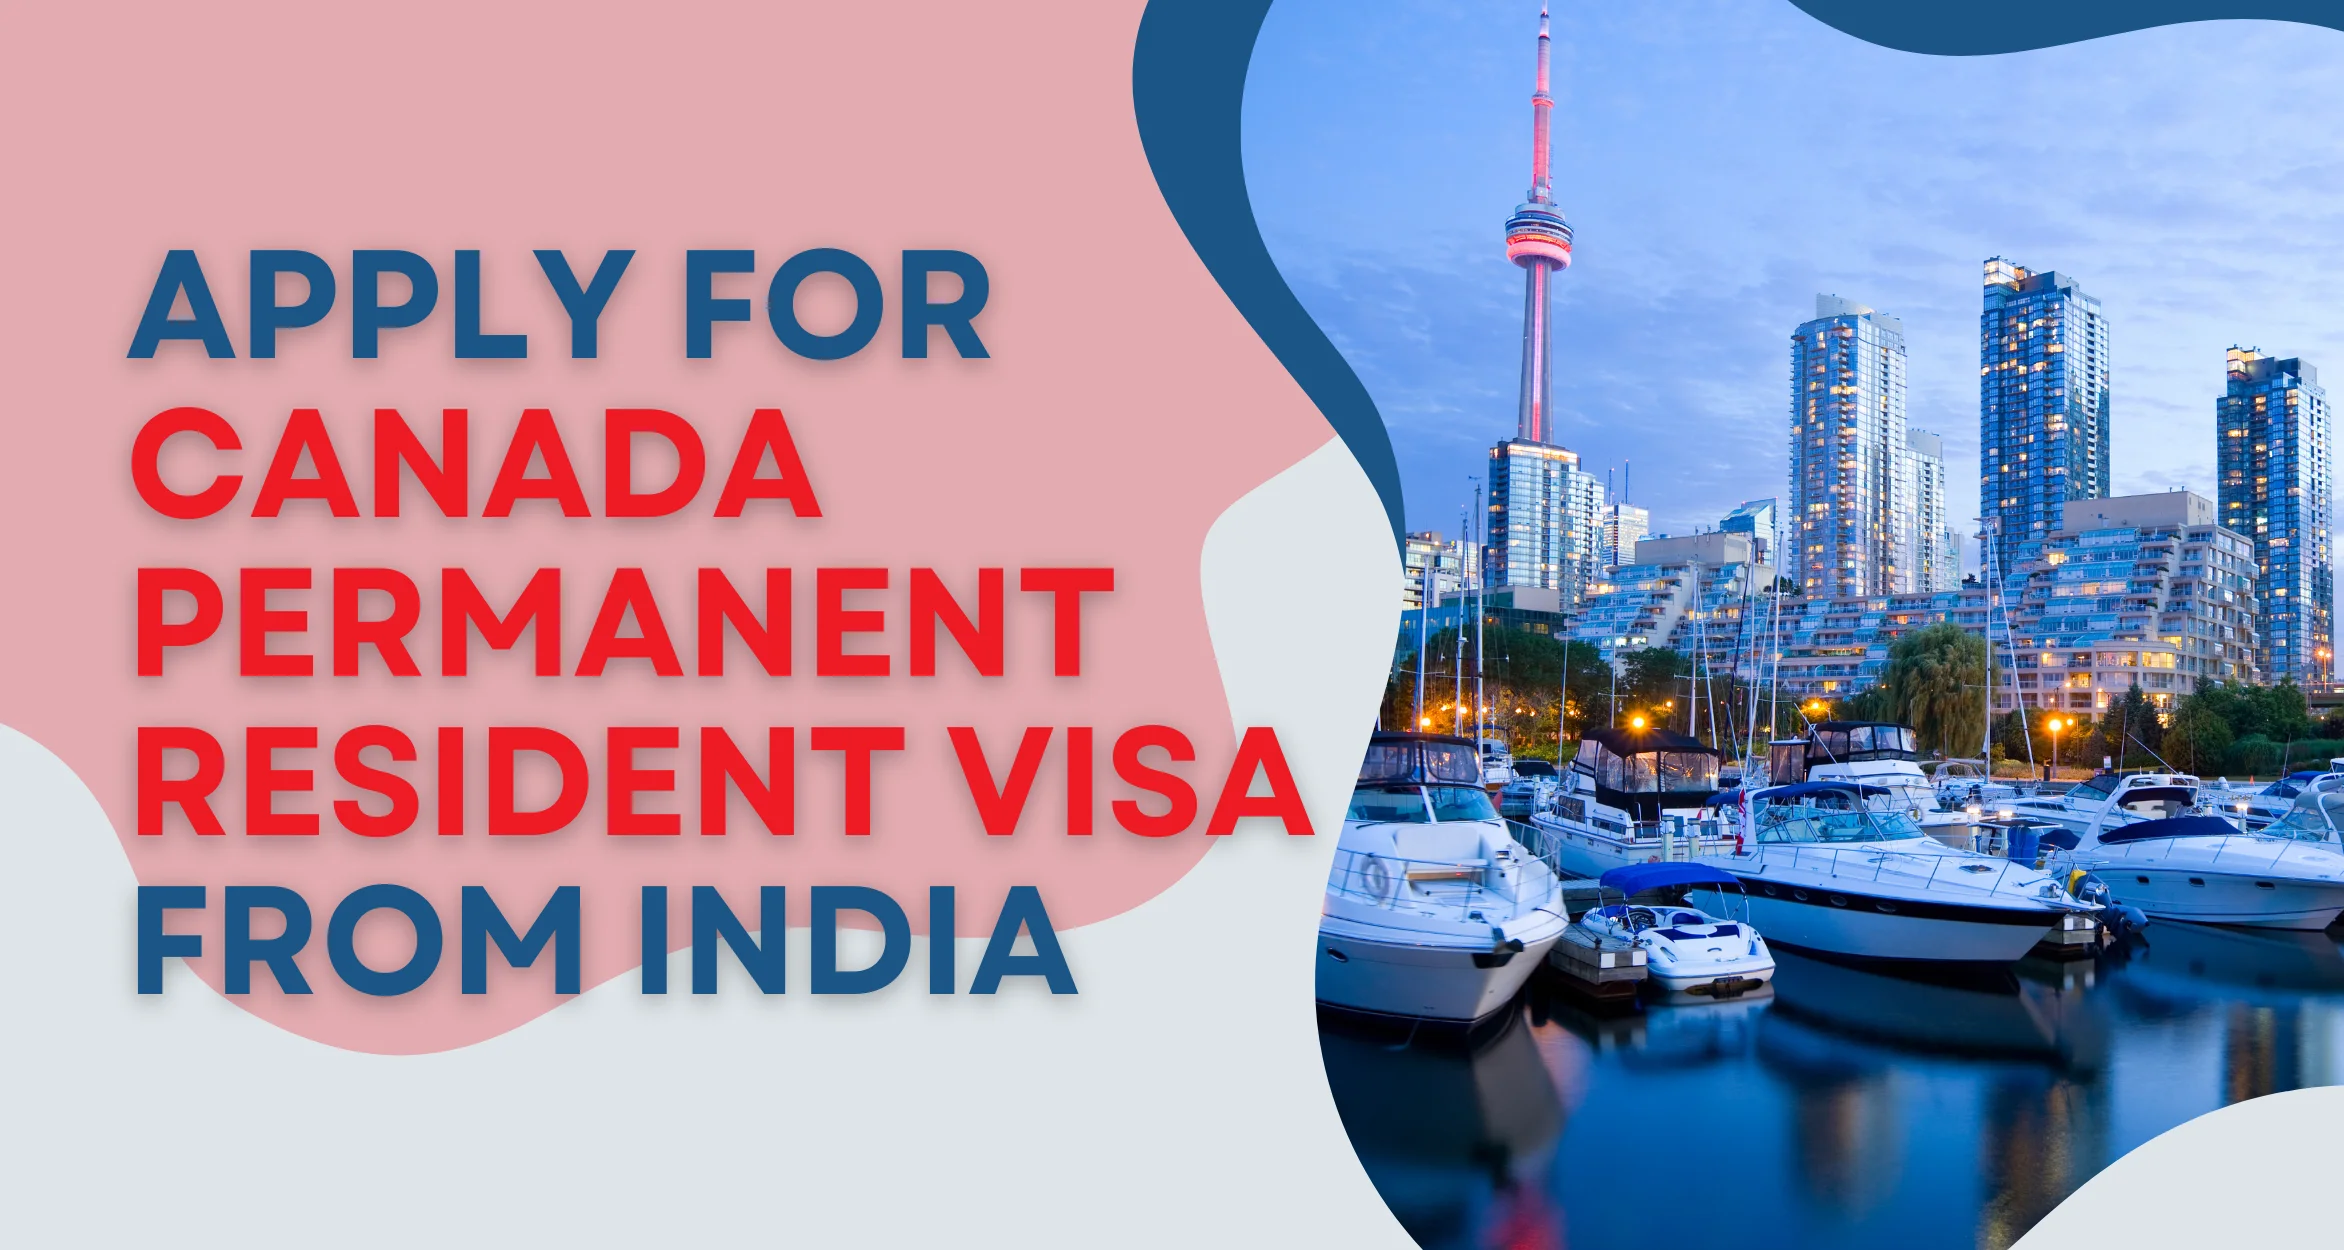 Apply for Canada Permanent Resident Visa from India